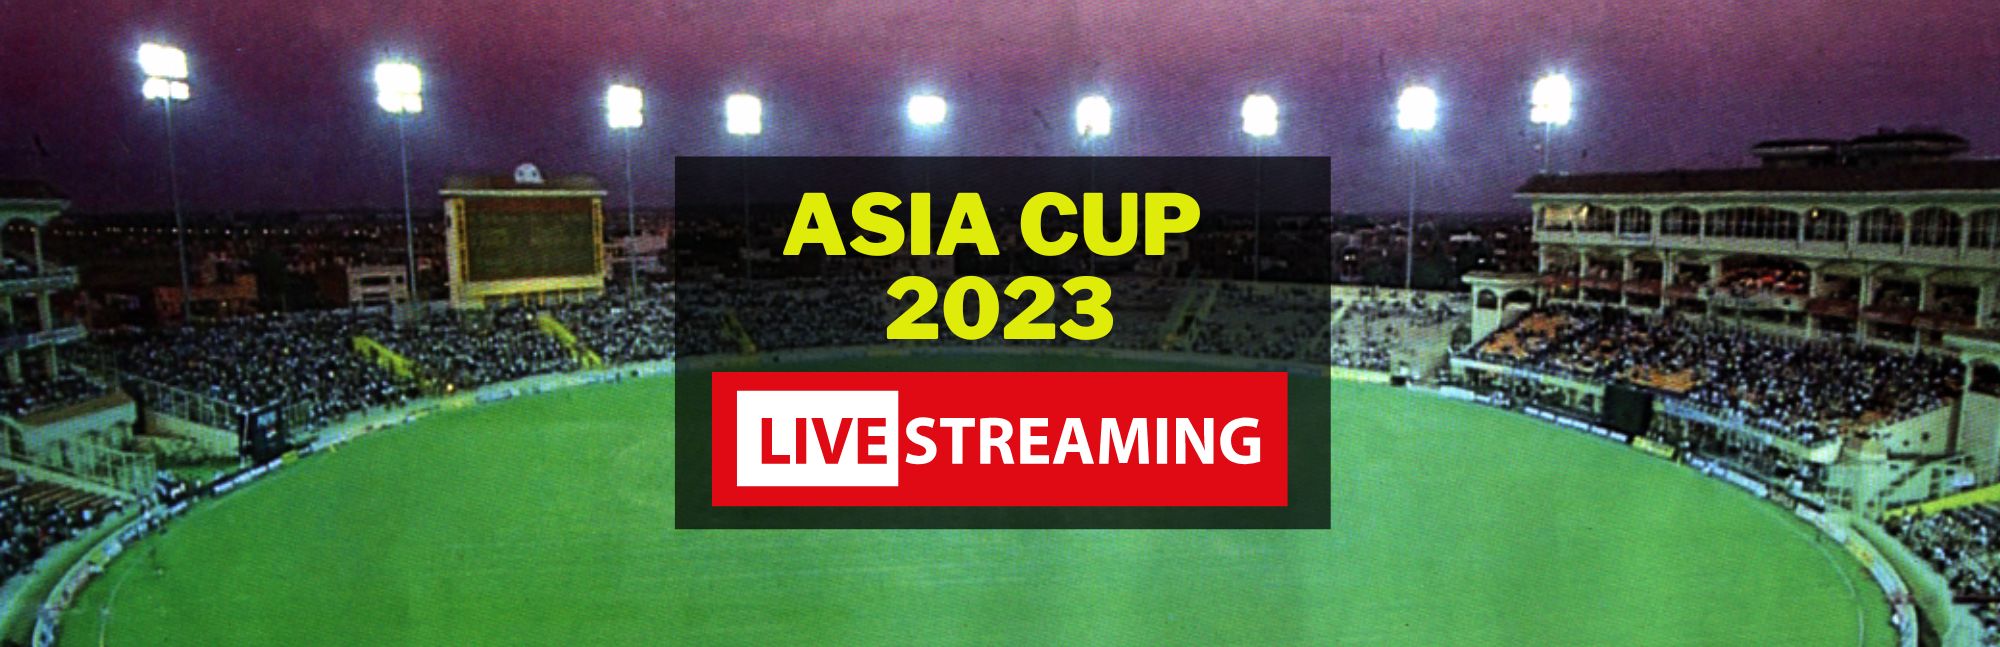 Live Streaming Of Asia Cup